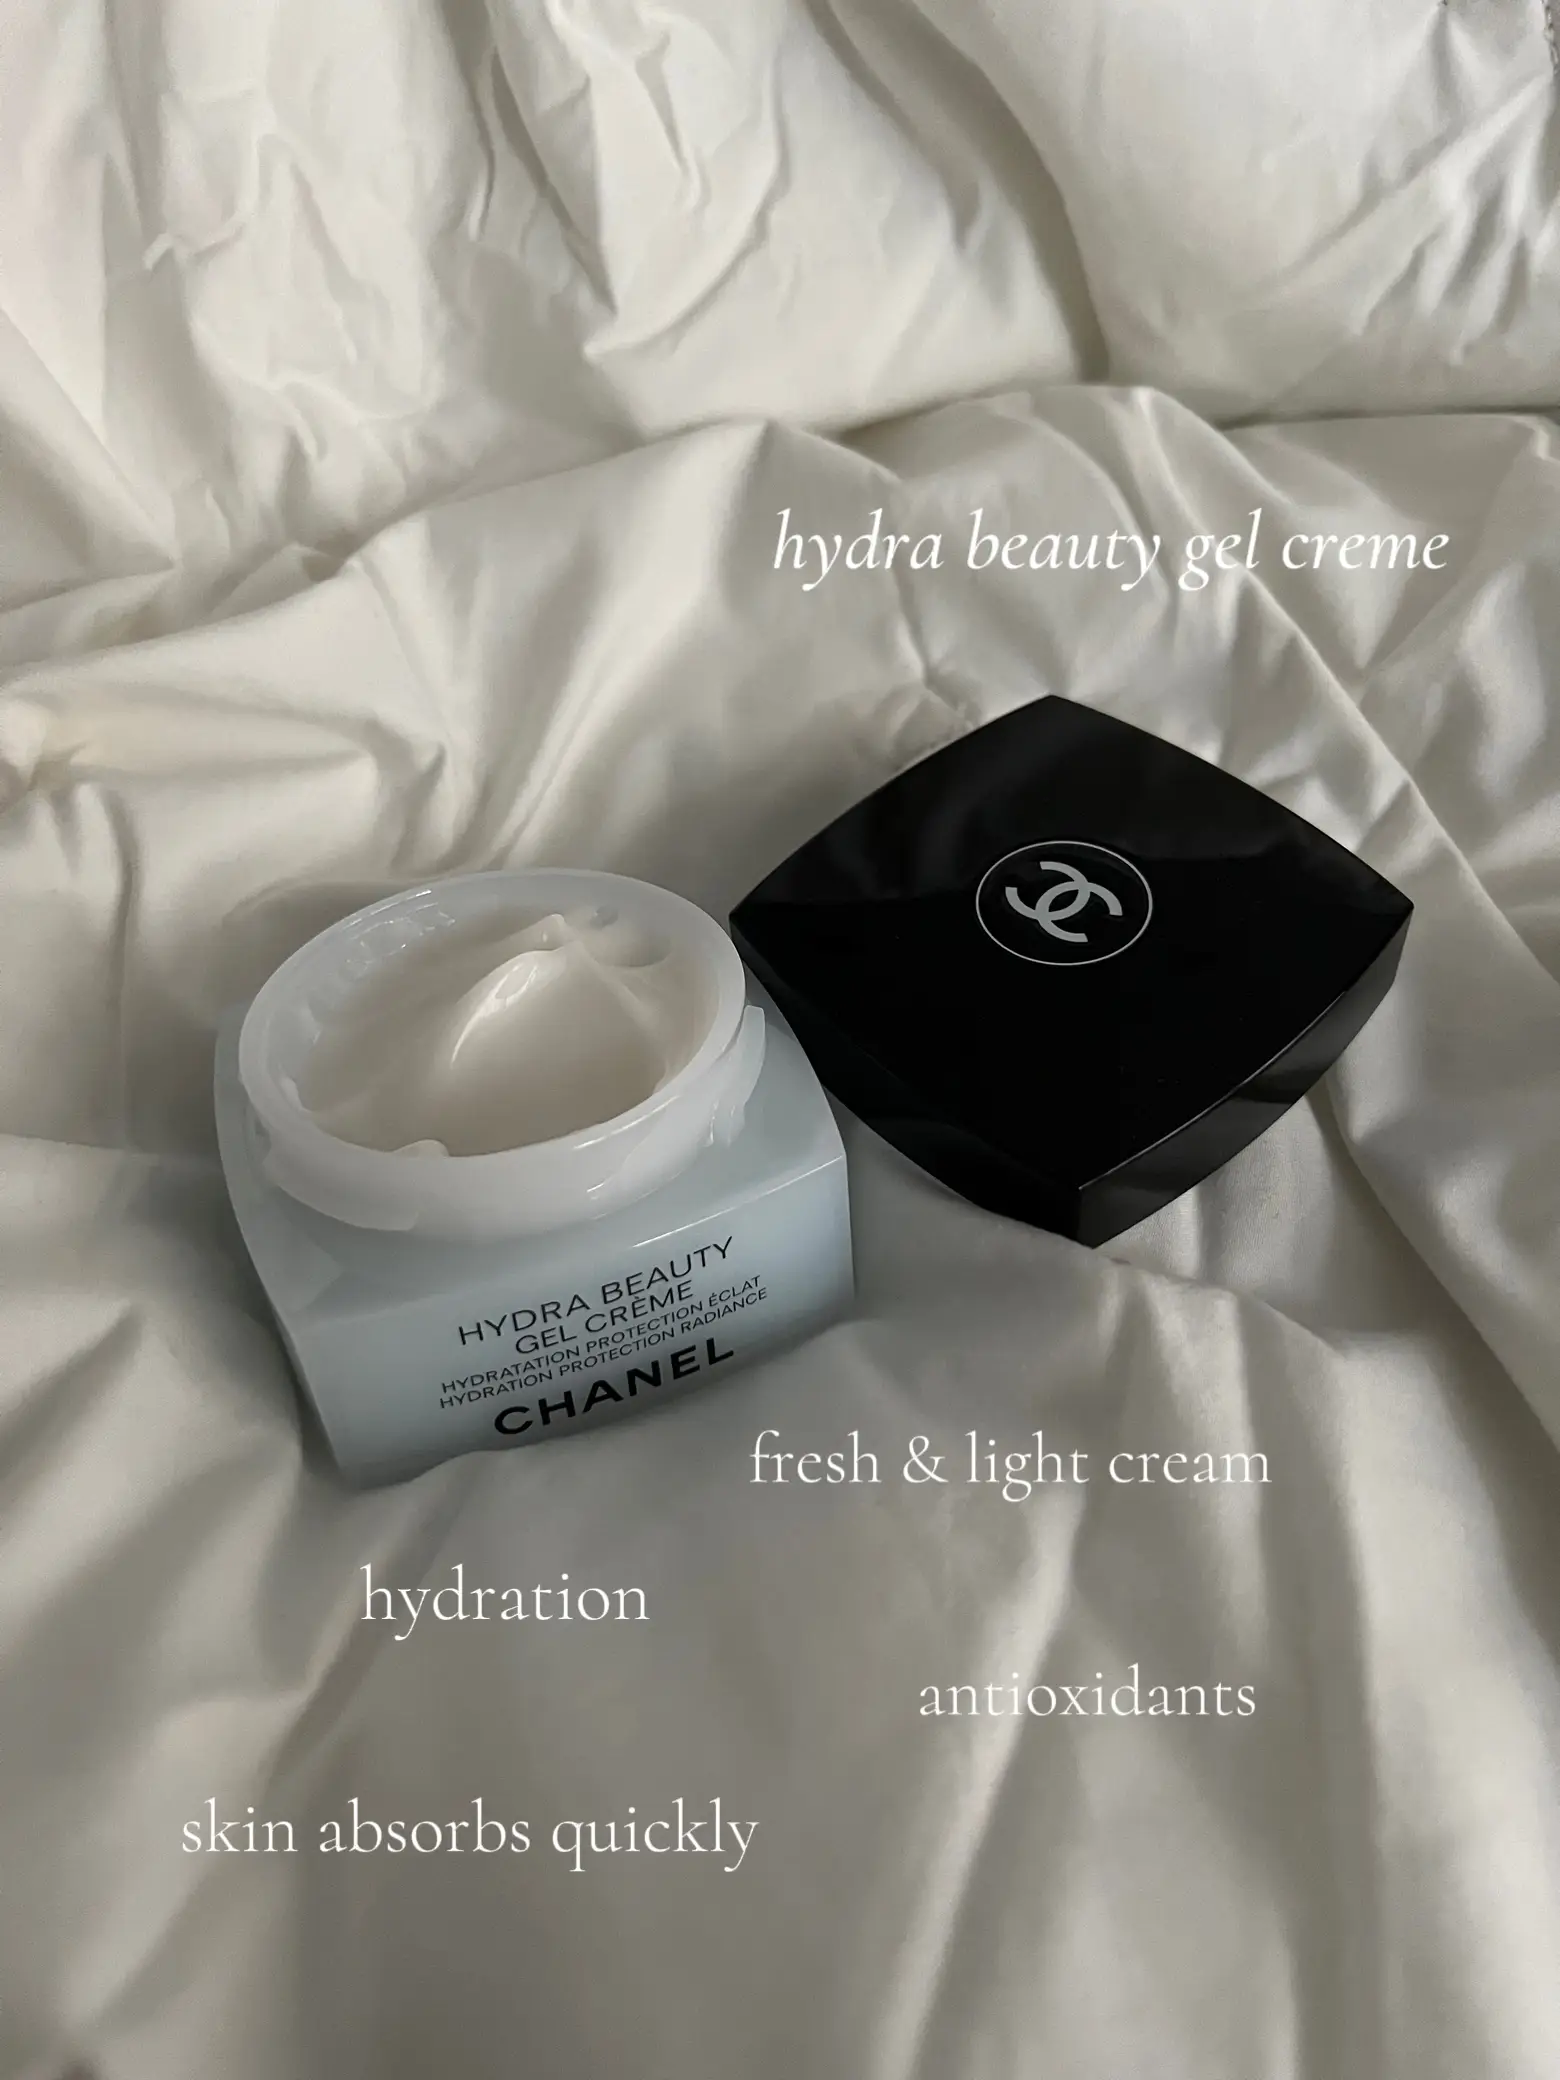 trying out Chanel's face care line: does it work?, Galeri disiarkan oleh  gisele rei!